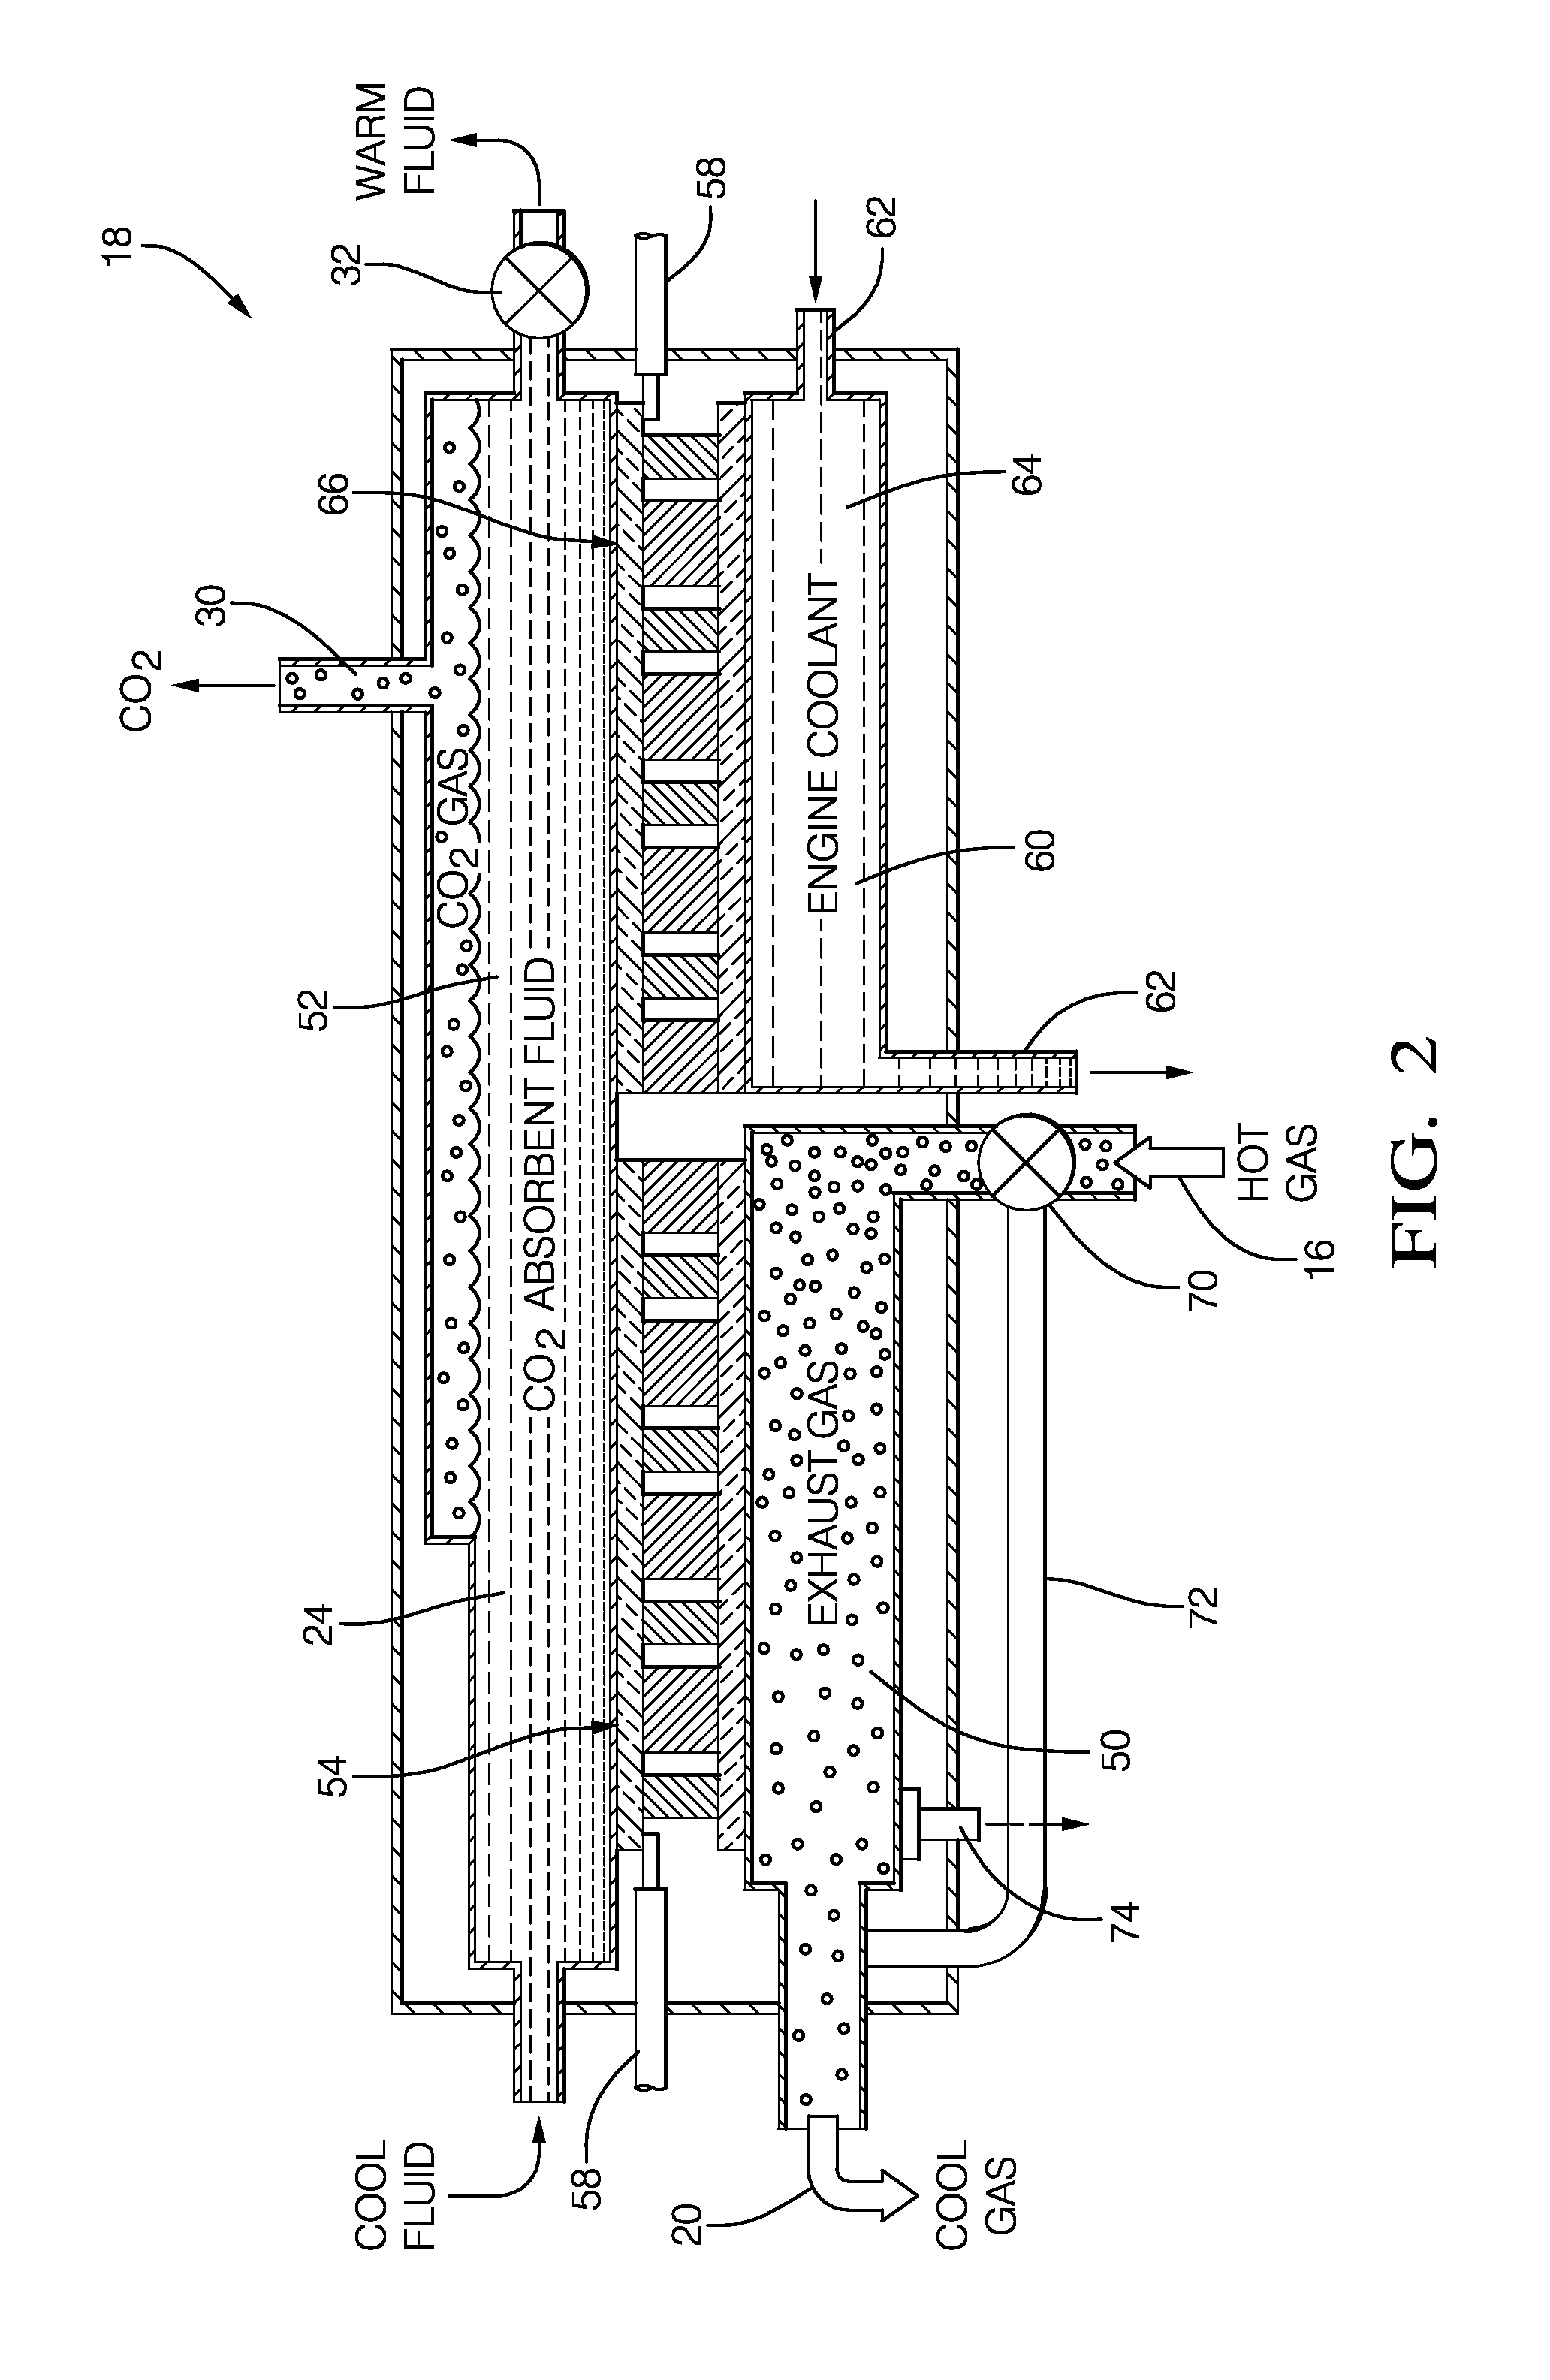 Carbon dioxide absorbent fluid for a carbon dioxide sequestering system on a vehicle